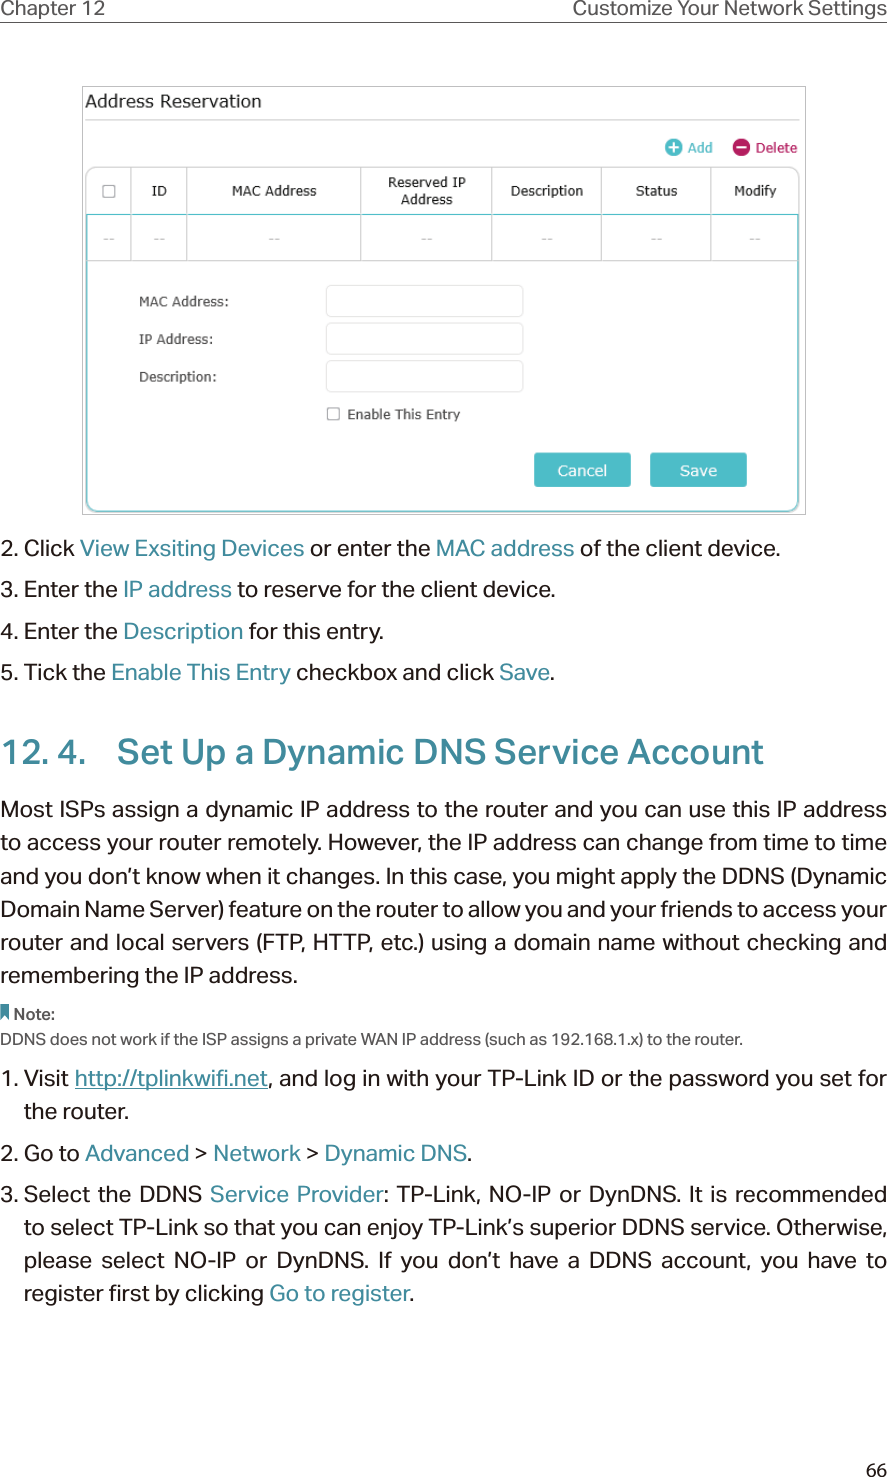 66Chapter 12 Customize Your Network Settings2. Click View Exsiting Devices or enter the MAC address of the client device.3. Enter the IP address to reserve for the client device.4. Enter the Description for this entry.5. Tick the Enable This Entry checkbox and click Save. 12. 4.  Set Up a Dynamic DNS Service AccountMost ISPs assign a dynamic IP address to the router and you can use this IP address to access your router remotely. However, the IP address can change from time to time and you don’t know when it changes. In this case, you might apply the DDNS (Dynamic Domain Name Server) feature on the router to allow you and your friends to access your router and local servers (FTP, HTTP, etc.) using a domain name without checking and remembering the IP address. Note: DDNS does not work if the ISP assigns a private WAN IP address (such as 192.168.1.x) to the router. 1. Visit http://tplinkwifi.net, and log in with your TP-Link ID or the password you set for the router.2. Go to Advanced &gt; Network &gt; Dynamic DNS.3. Select  the  DDNS  Service Provider: TP-Link, NO-IP or DynDNS. It is recommended to select TP-Link so that you can enjoy TP-Link’s superior DDNS service. Otherwise, please select NO-IP or DynDNS. If you don’t have a DDNS account, you have to  register first by clicking Go to register.